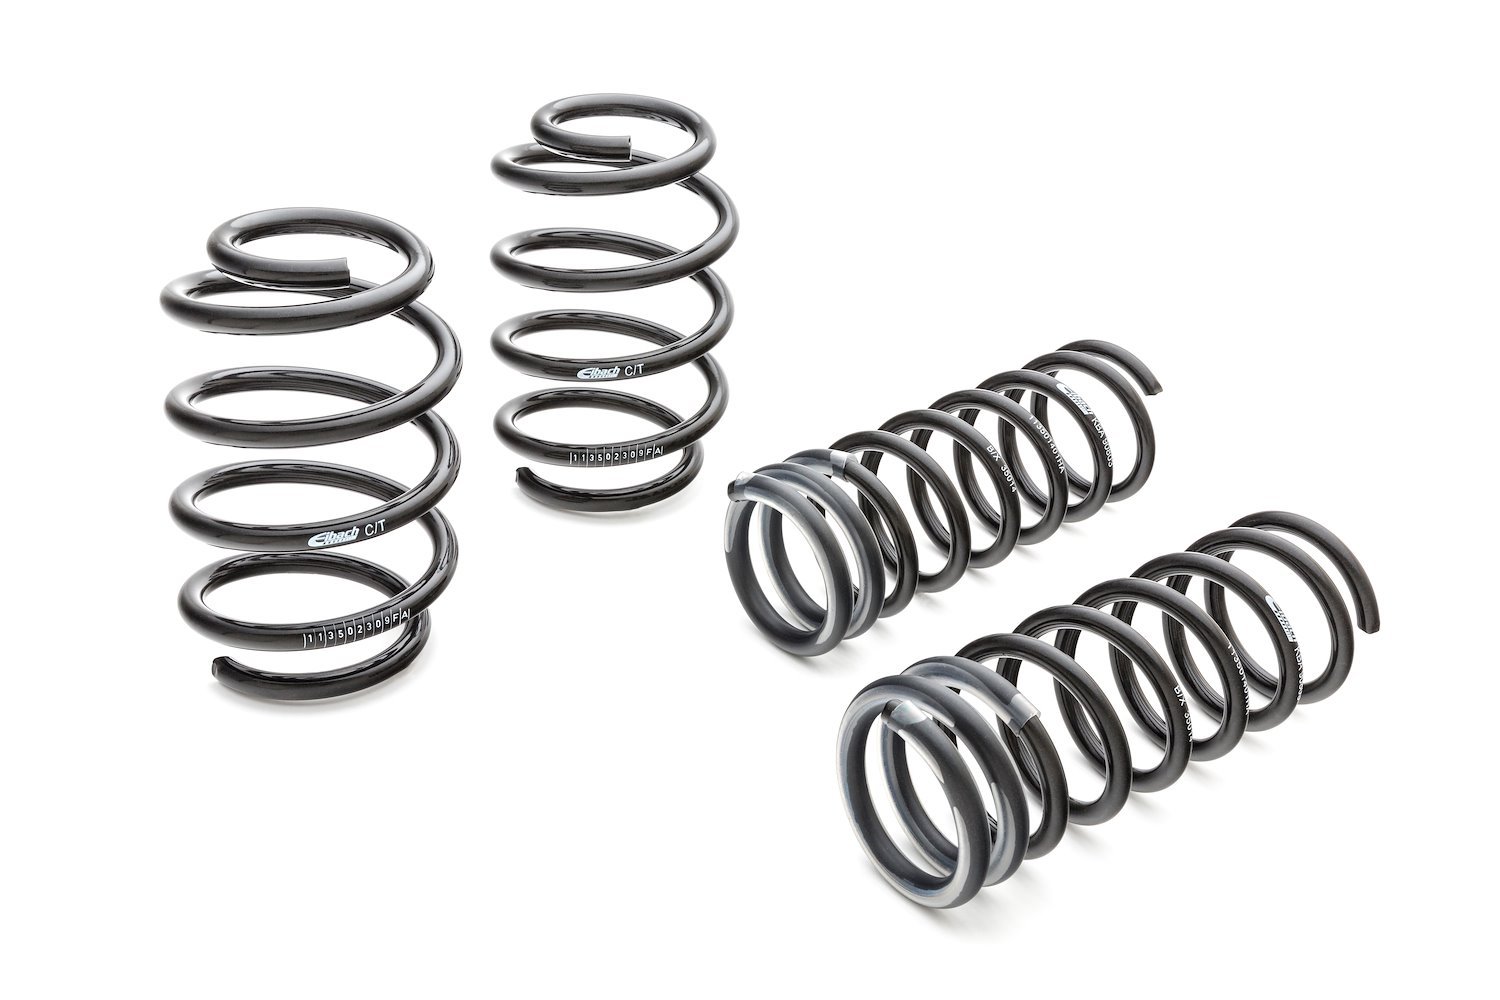 4045.140 Pro-Kit Lowering Springs 2003-2007 Honda Accord 4-cylinder - 1.200 in. Front/1.300 in. Rear Drop